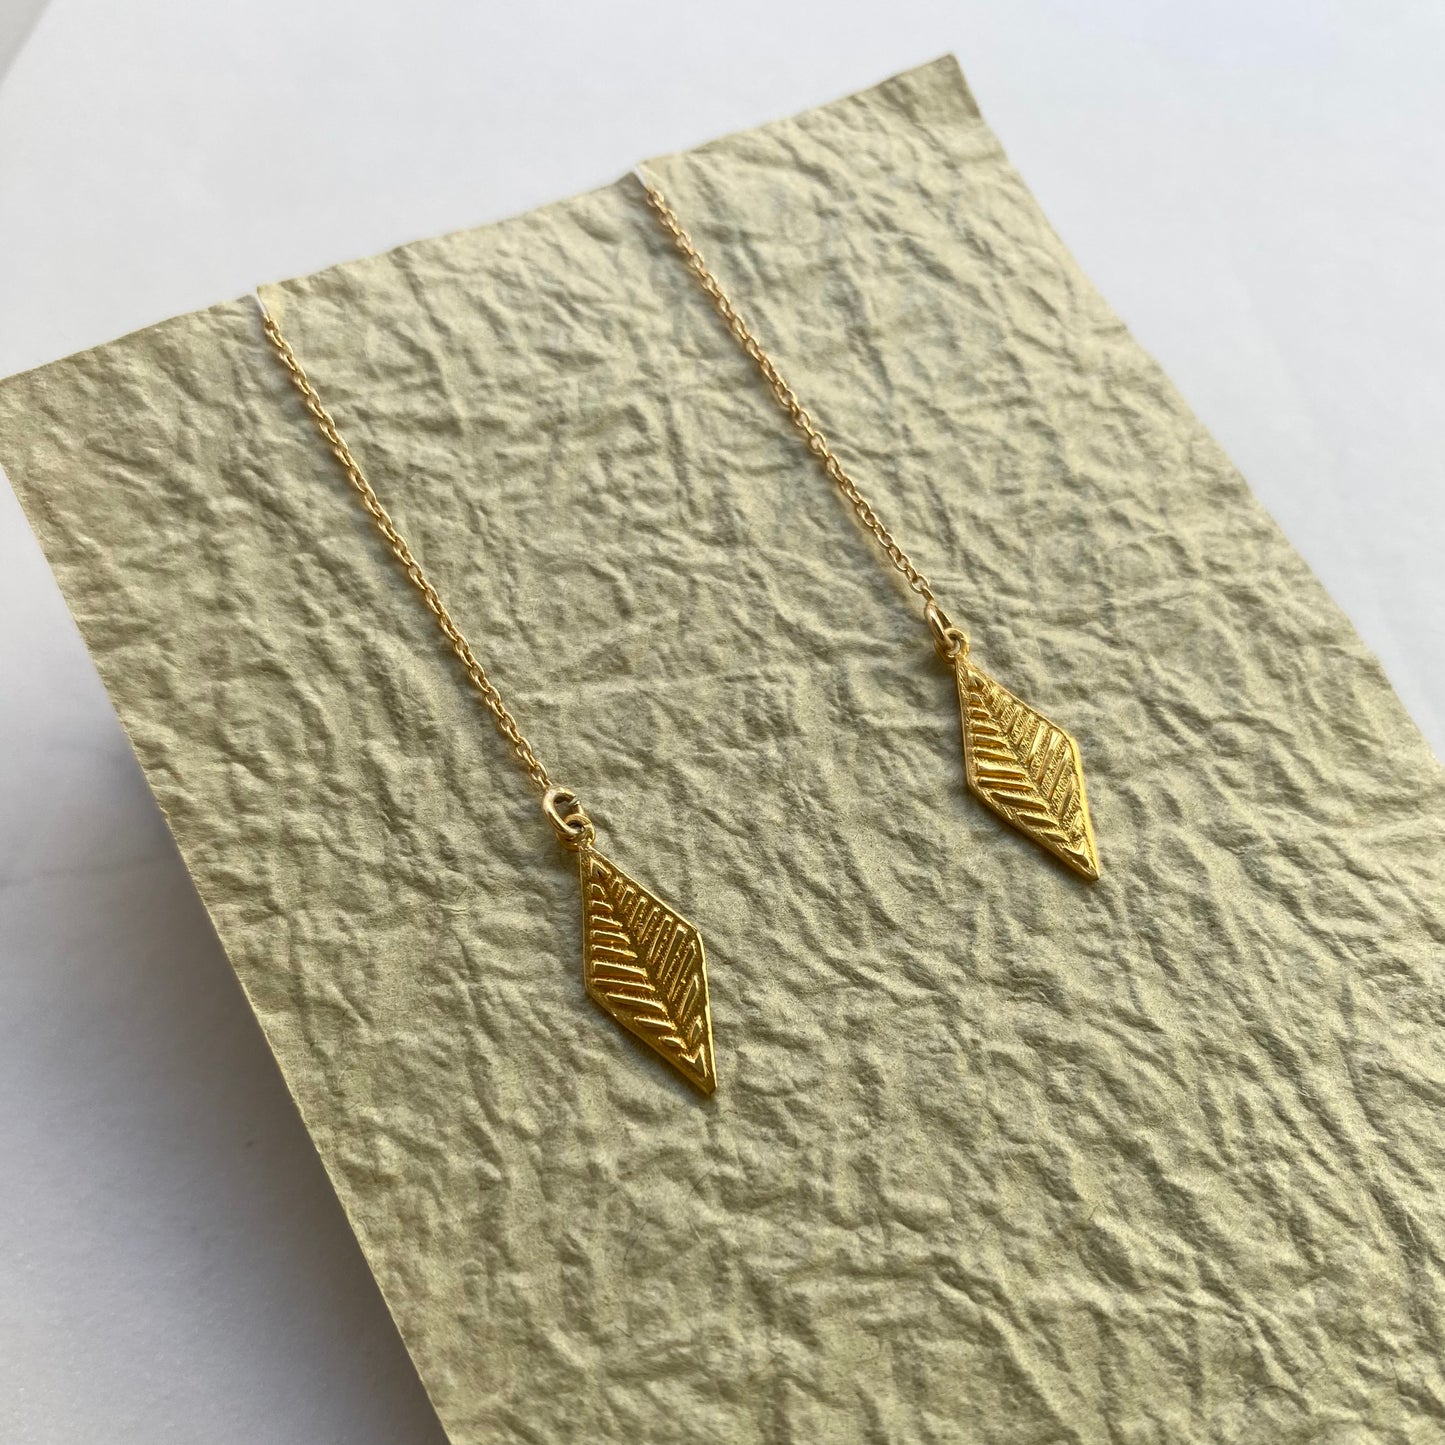 Romvos velonies/stitches | pull through chain earrings silver or goldplated